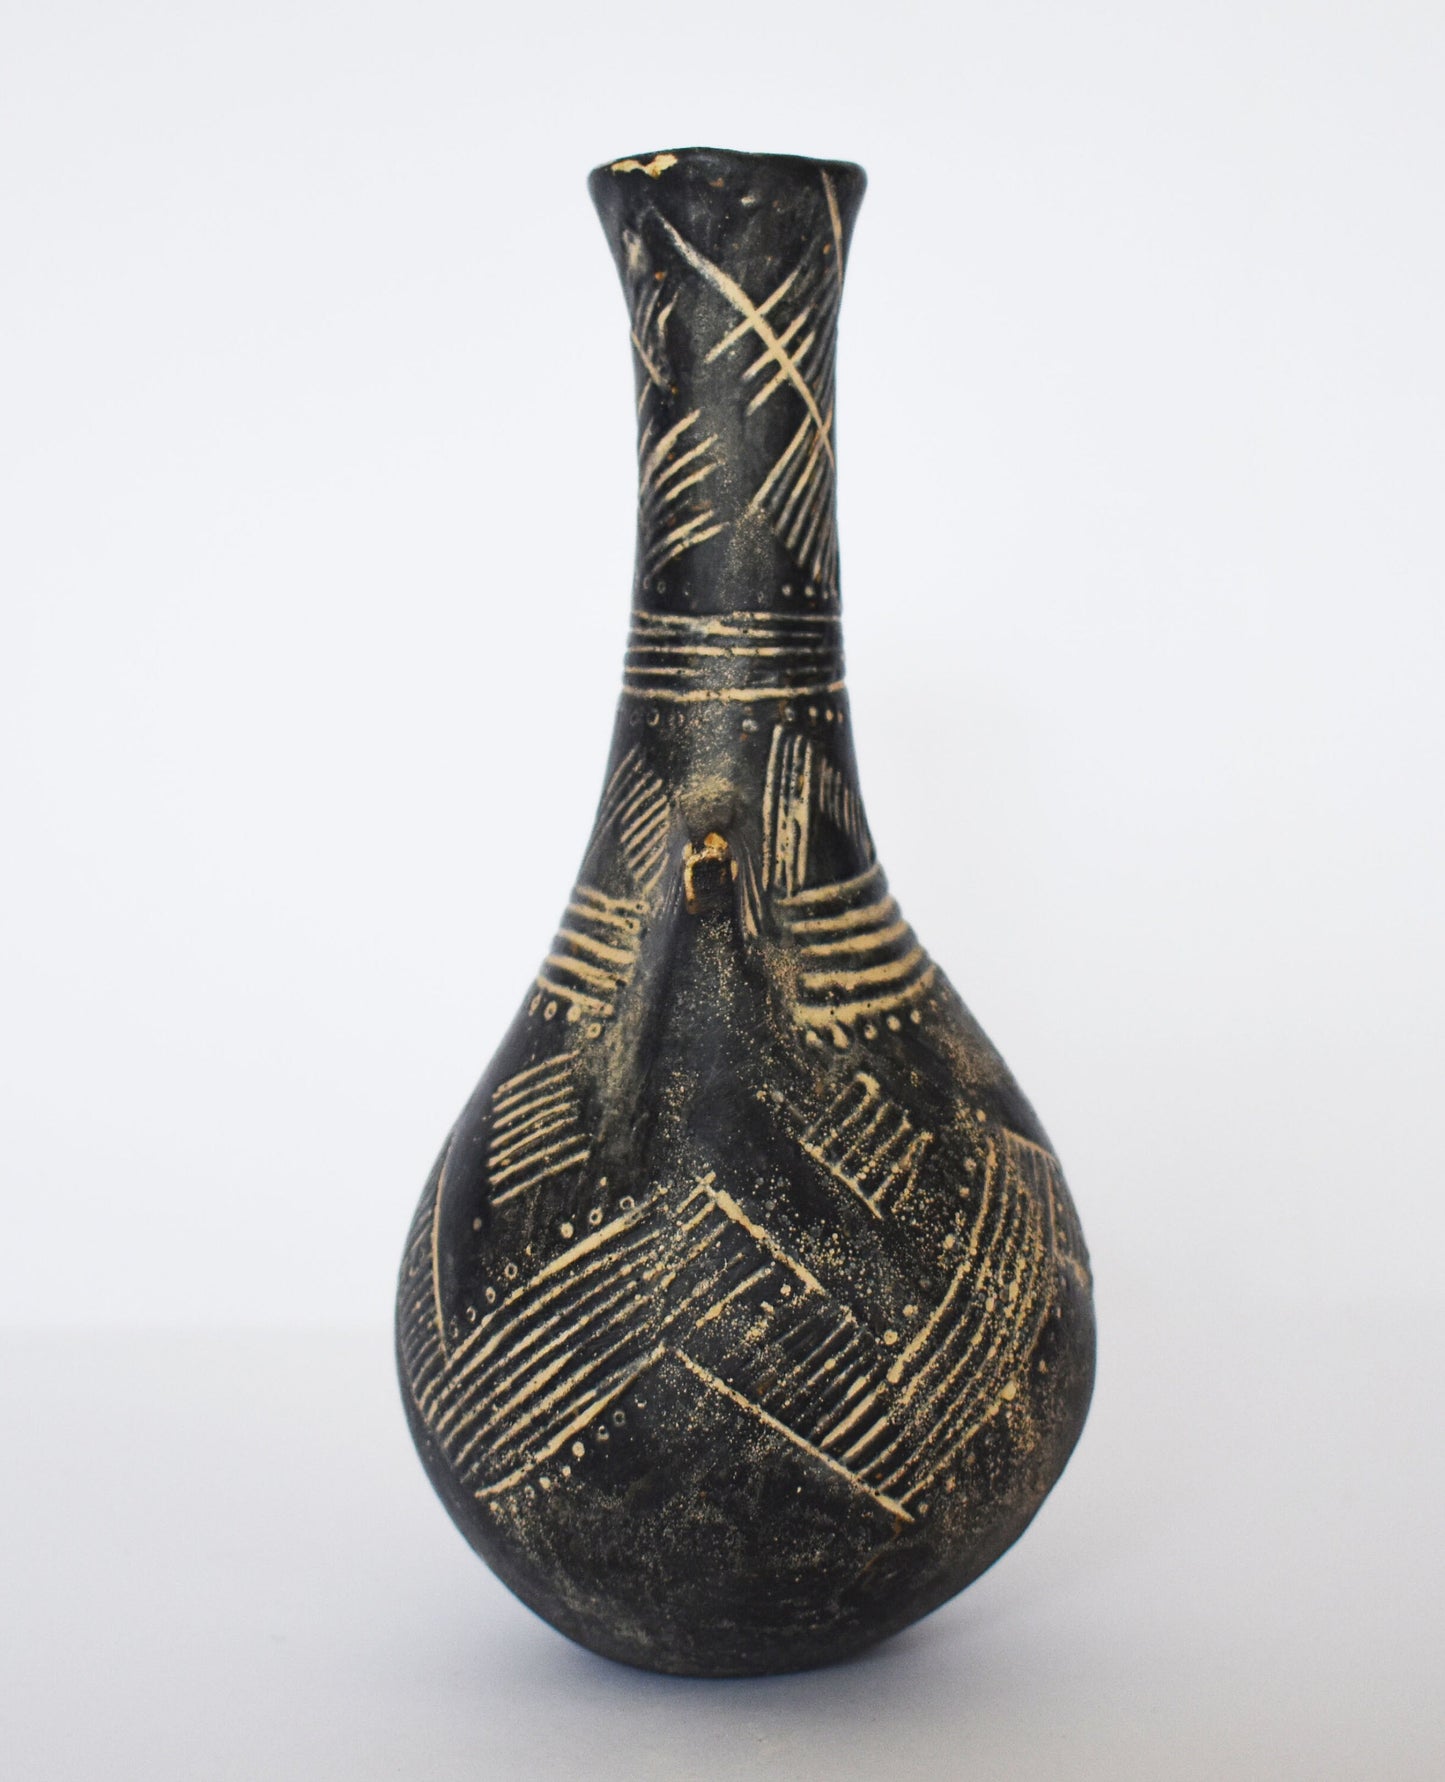 Long Neck Vessel - Cypriot -  1800 BC - Museum Reproduction - Ceramic Artifact